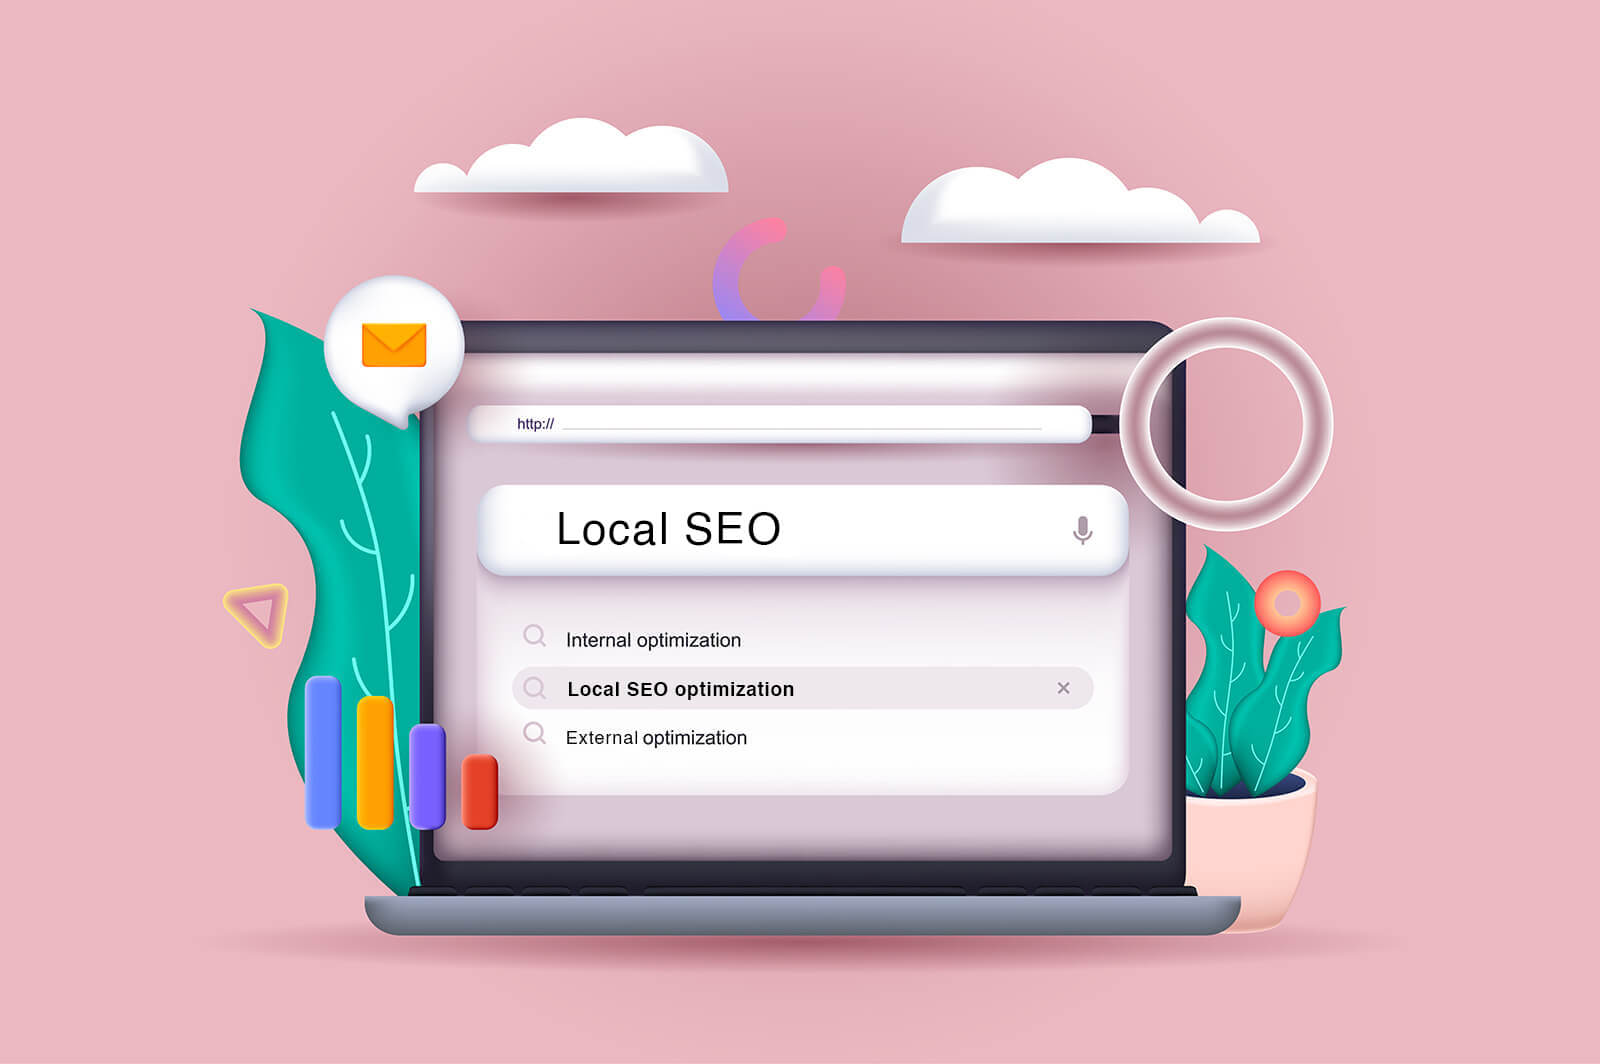 Illustrated browser window with 'Local SEO for startups' search bar, symbolizing the importance of location-based optimization.